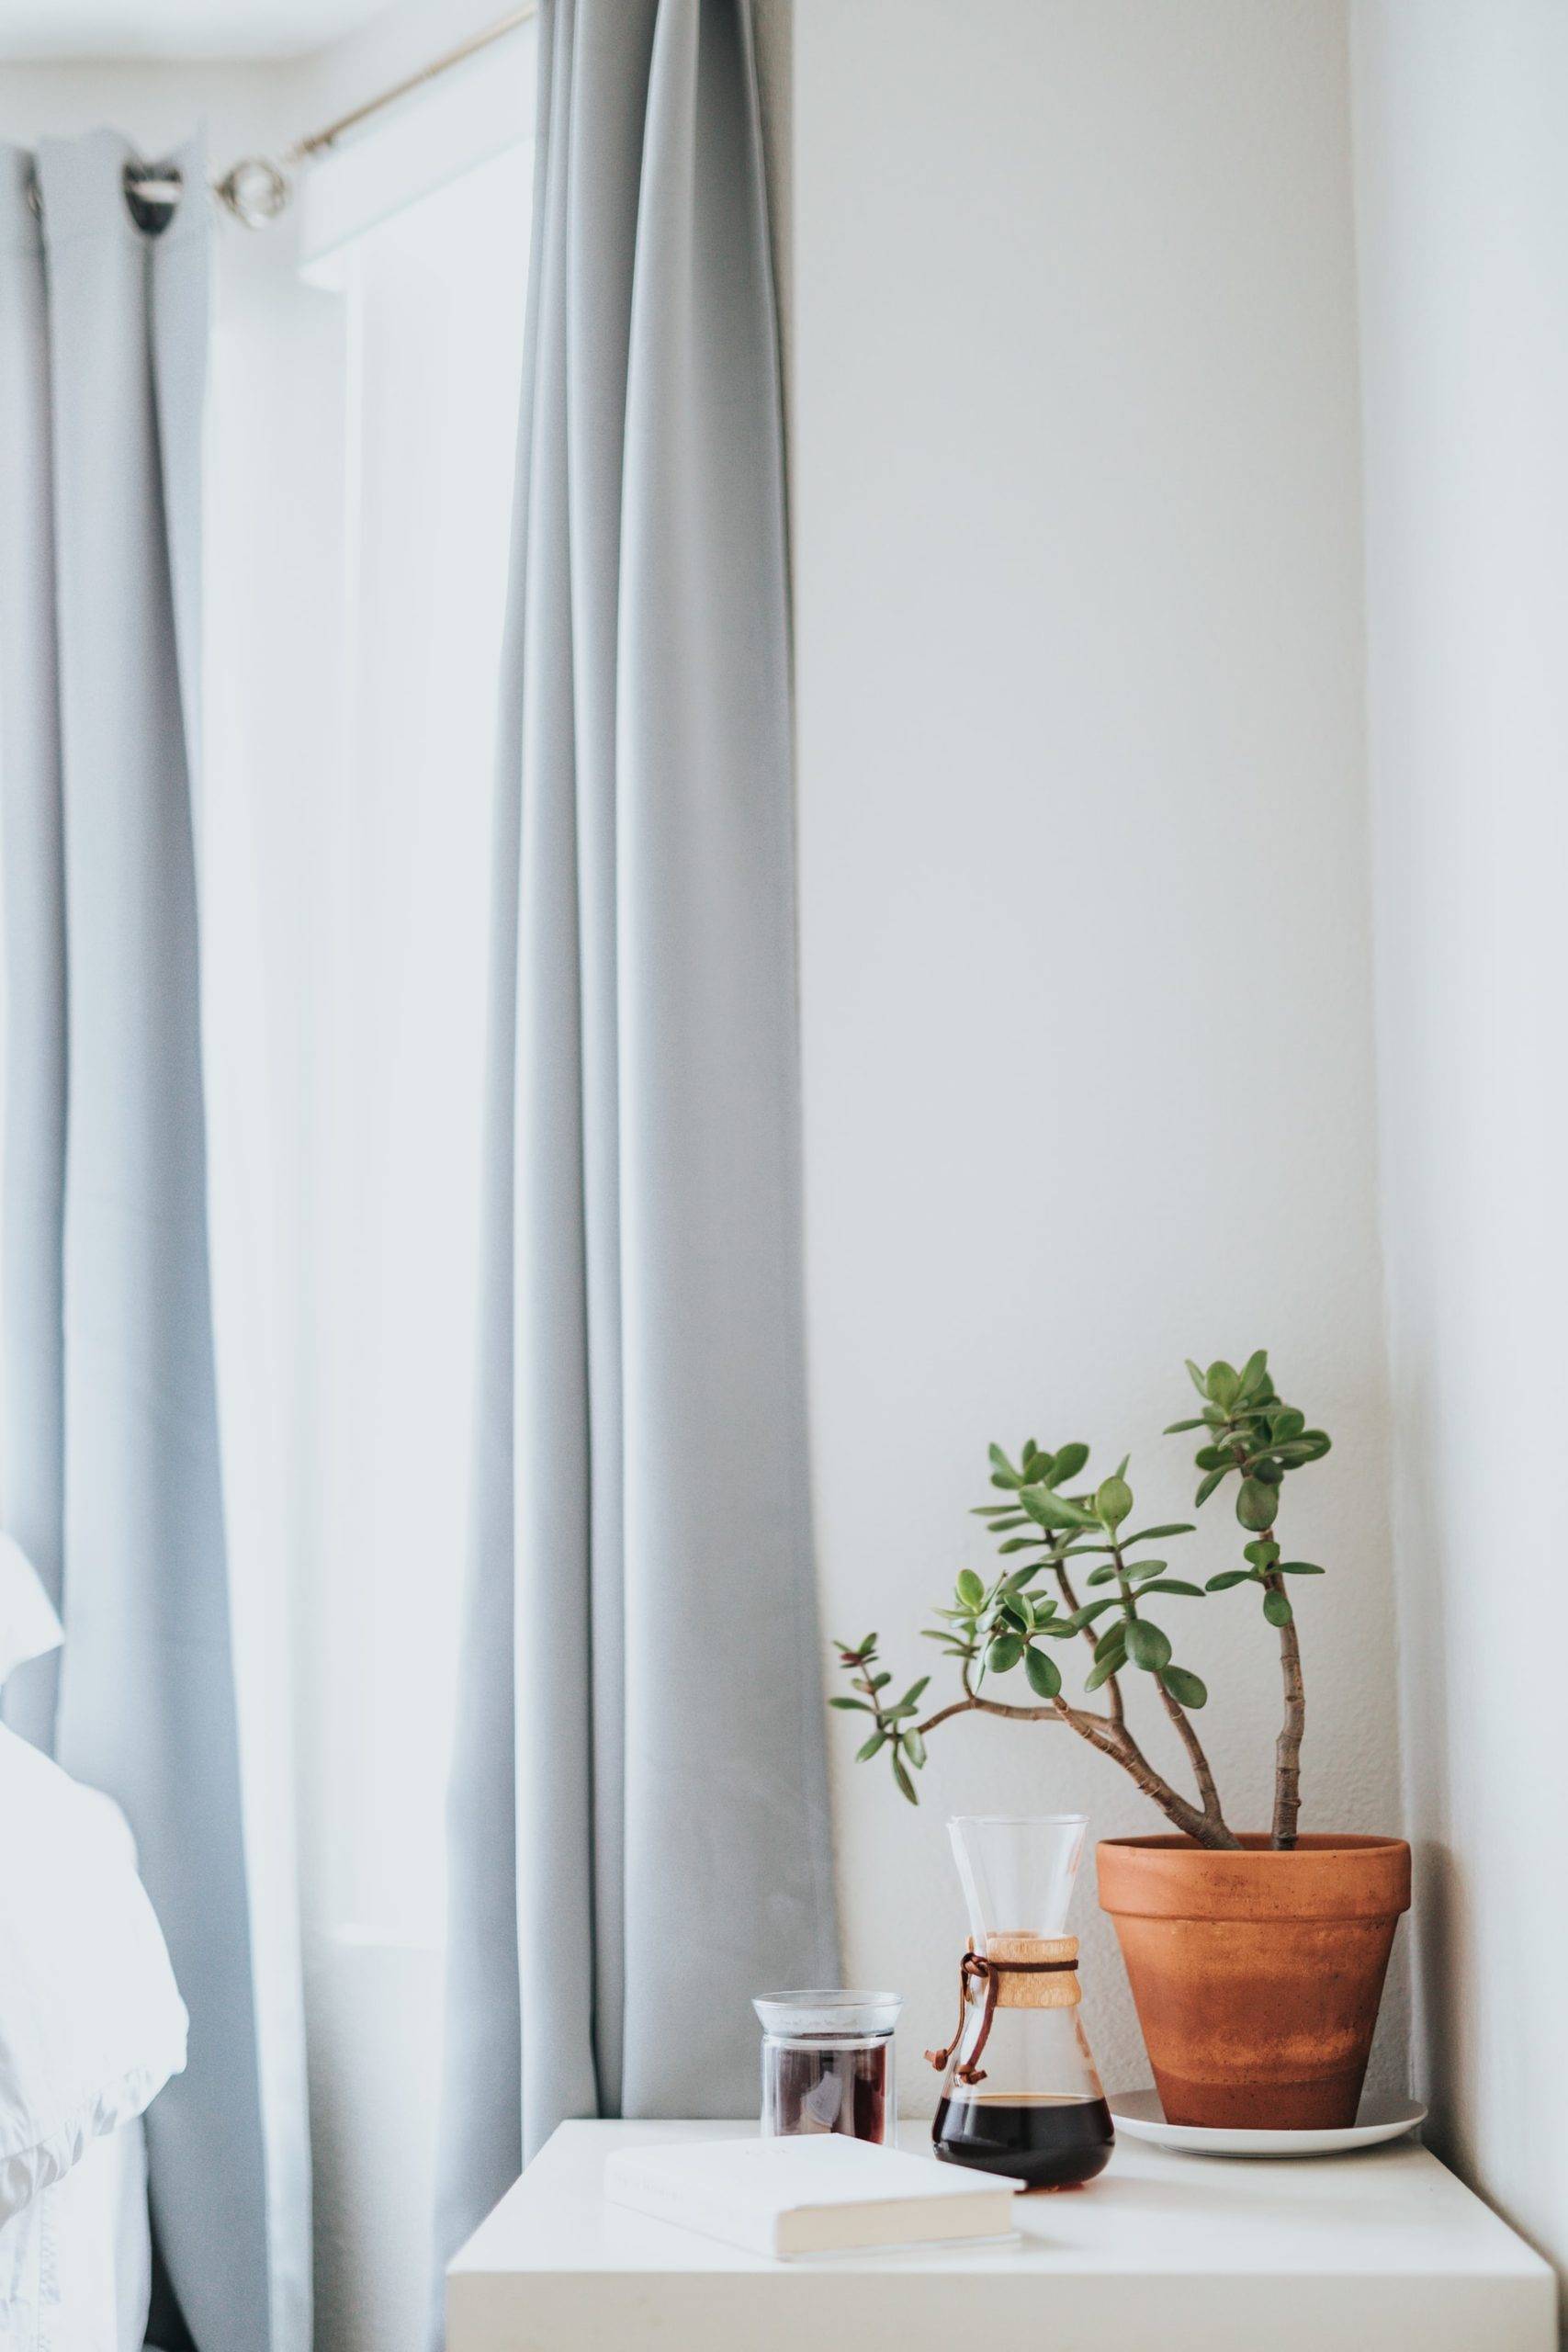 The cute jade plant is ideal pick for your bedroom (from Unsplash)